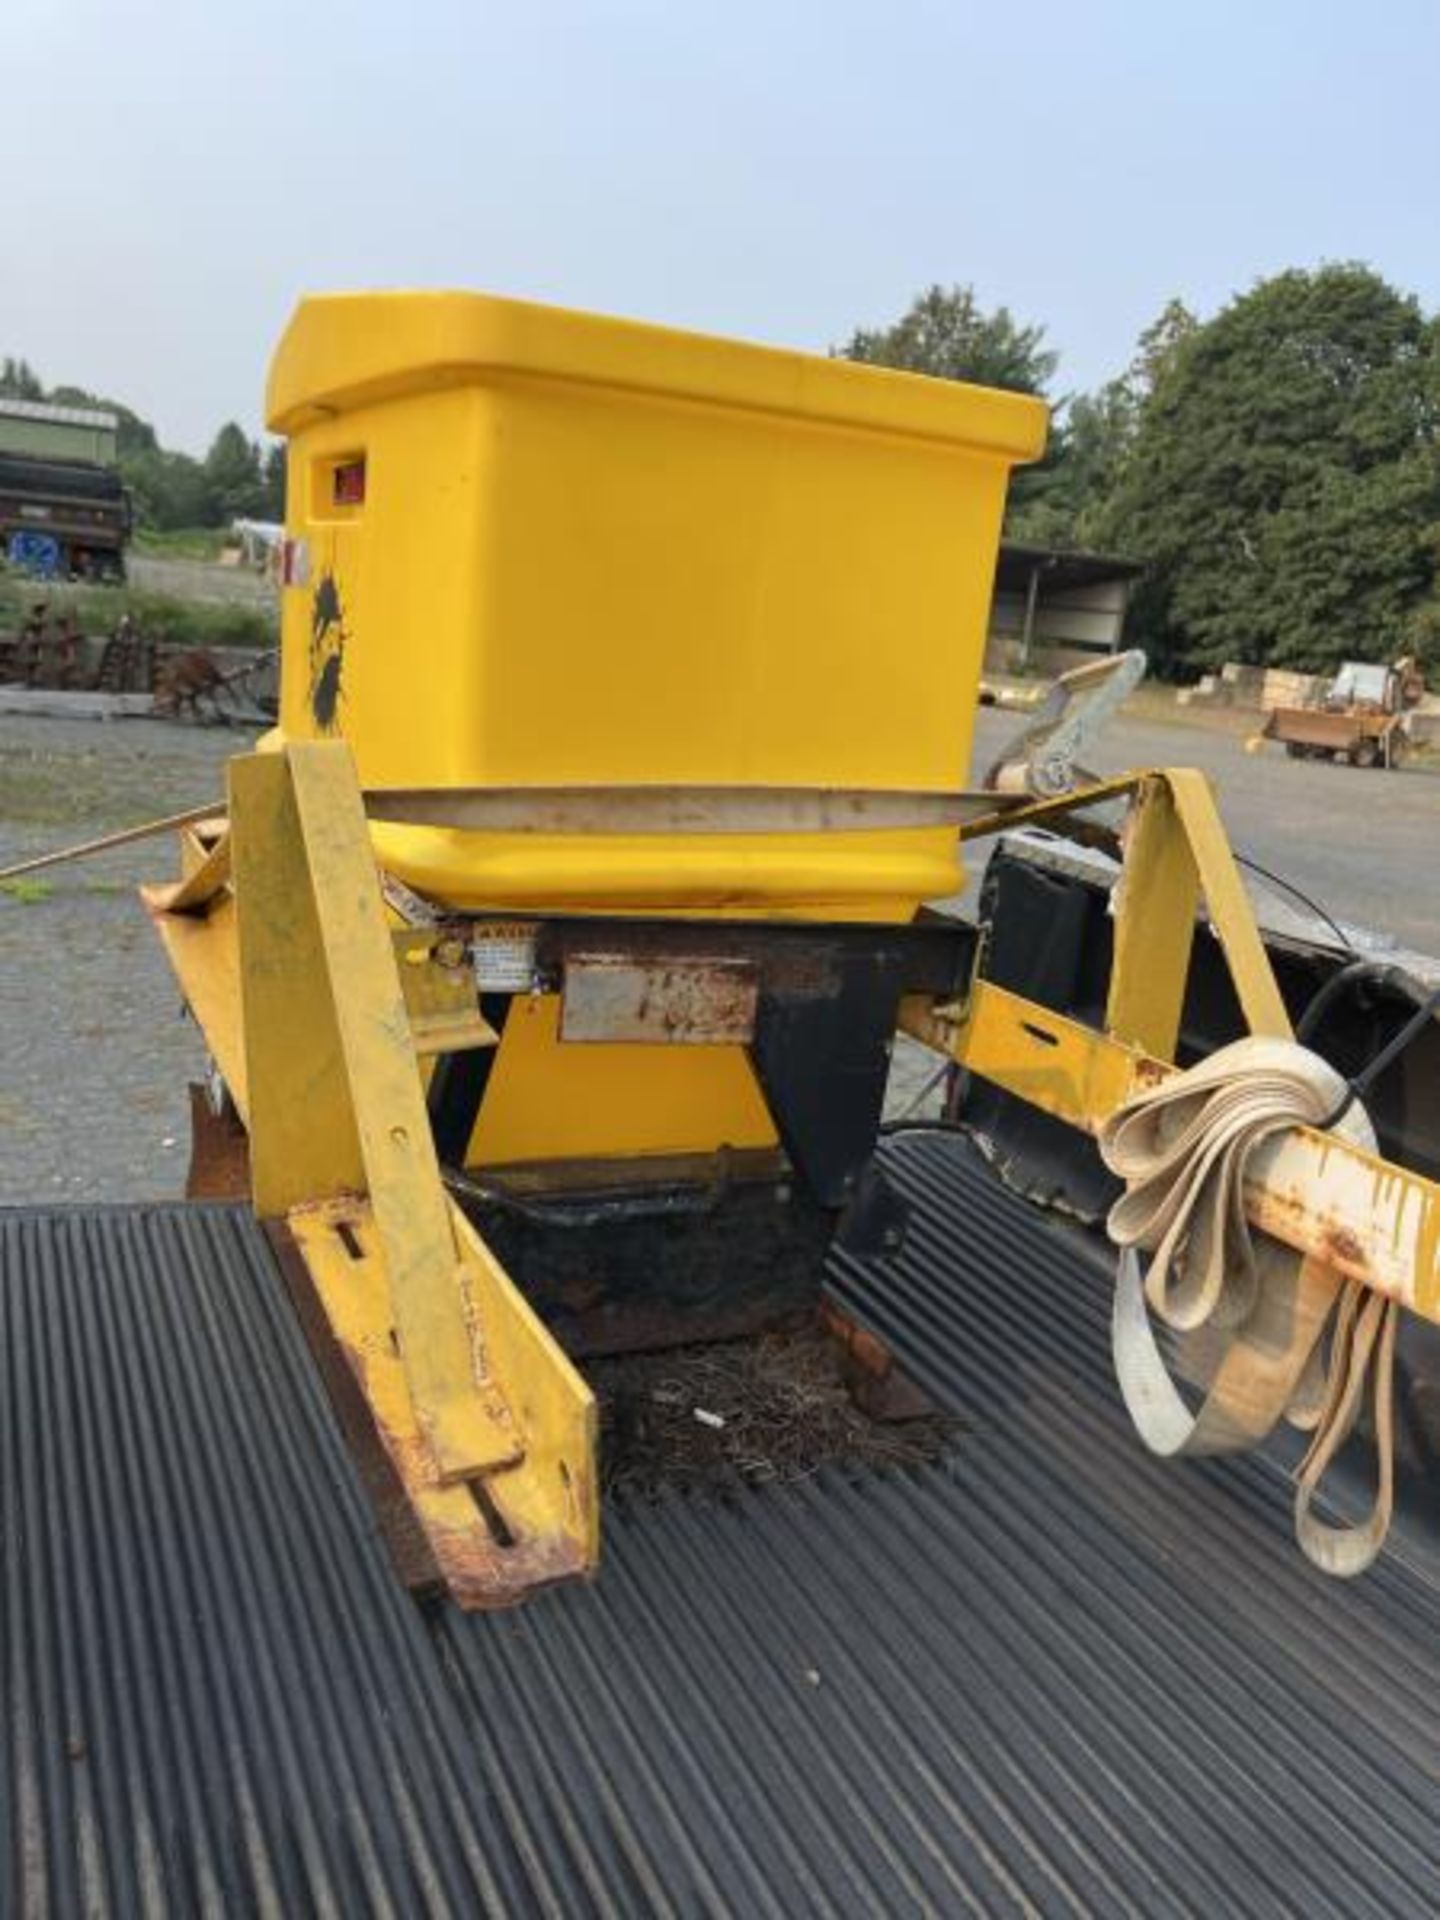 Fisher speed caster 2 stage spreader 12V truck mounter SN: 205063 (Buyer responsible for disconnecti - Image 2 of 6